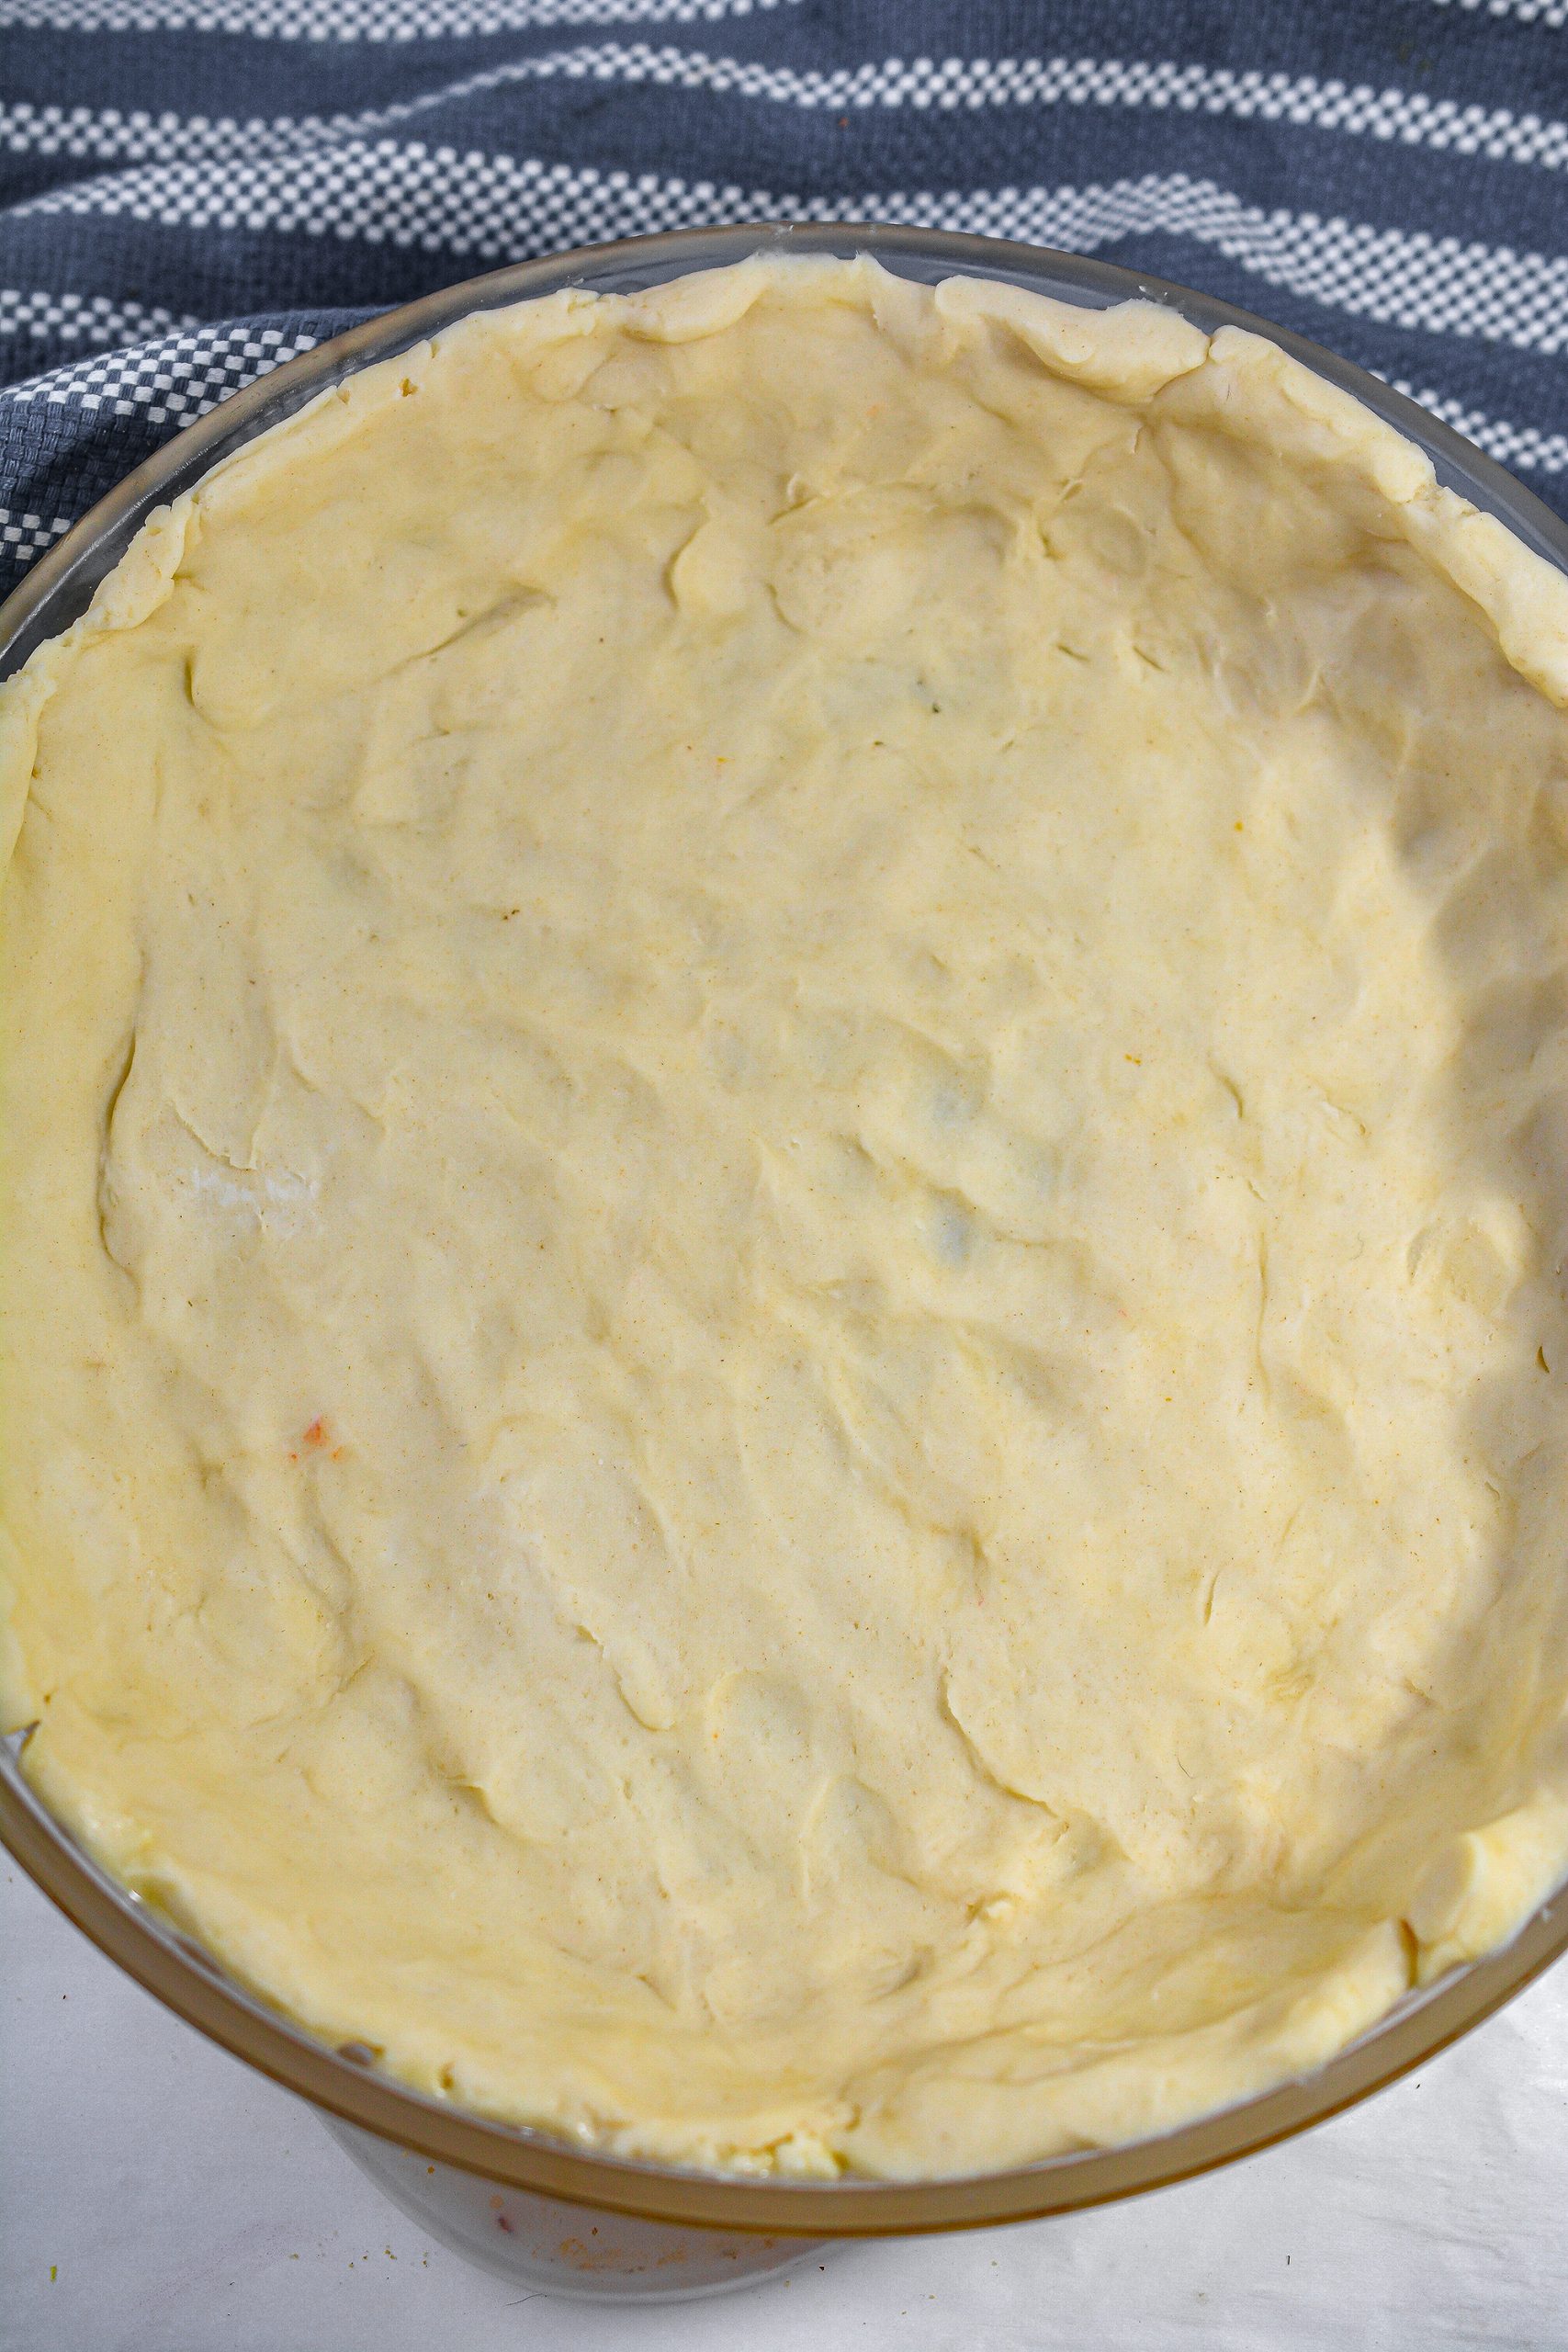 Remove the chilled dough from the fridge and press into a well greased 9 inch pie dish.